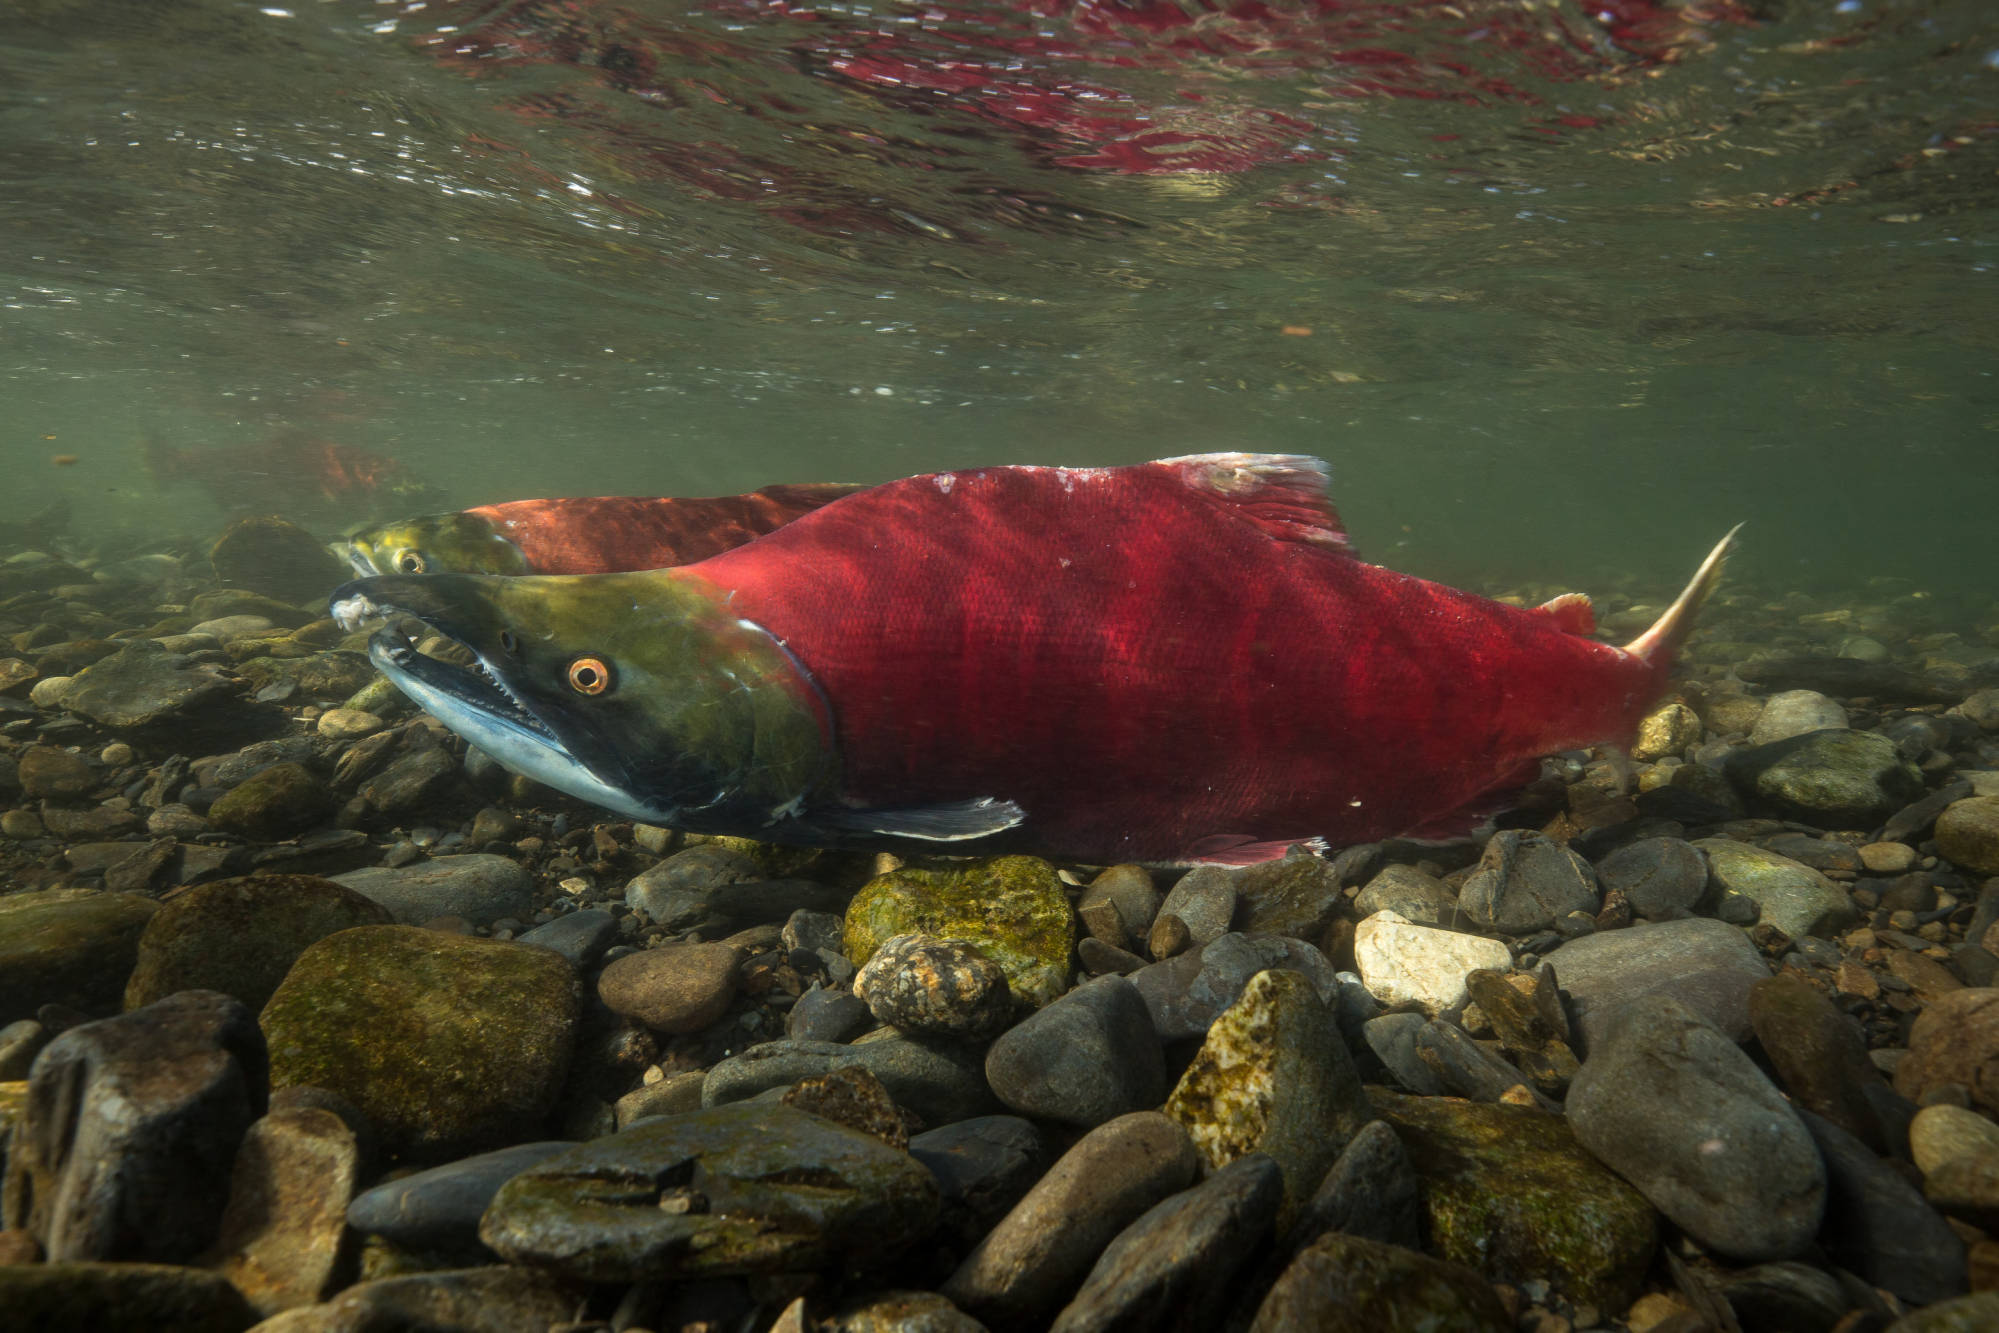 Red sockeye salmon with hooked jaw swimming in Alaska stream.